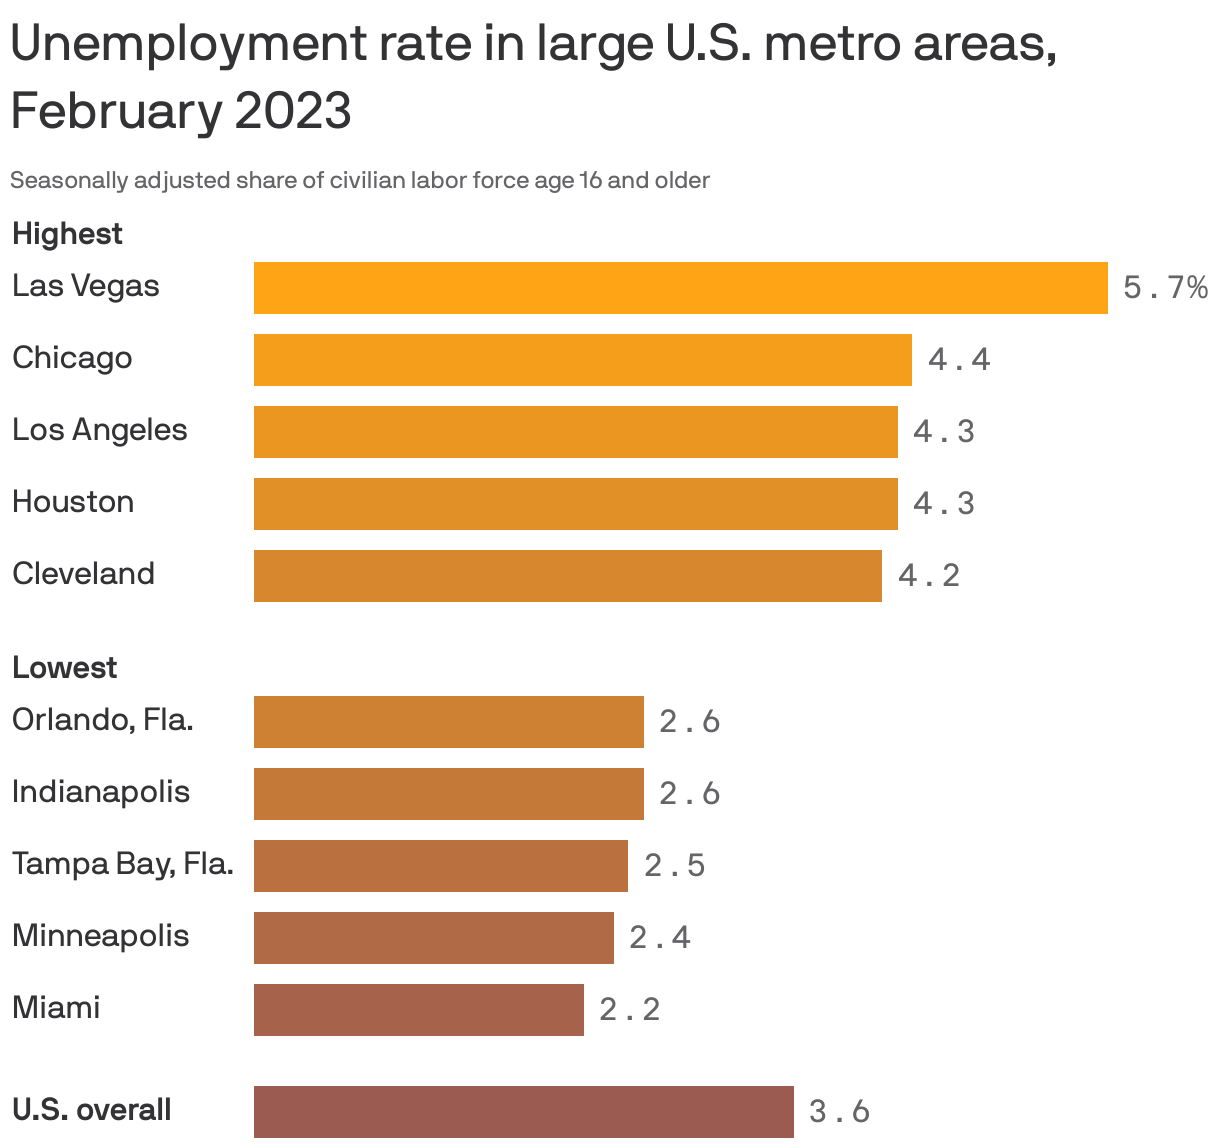 Unemployment rate in large U.S. metro areas, February 2023